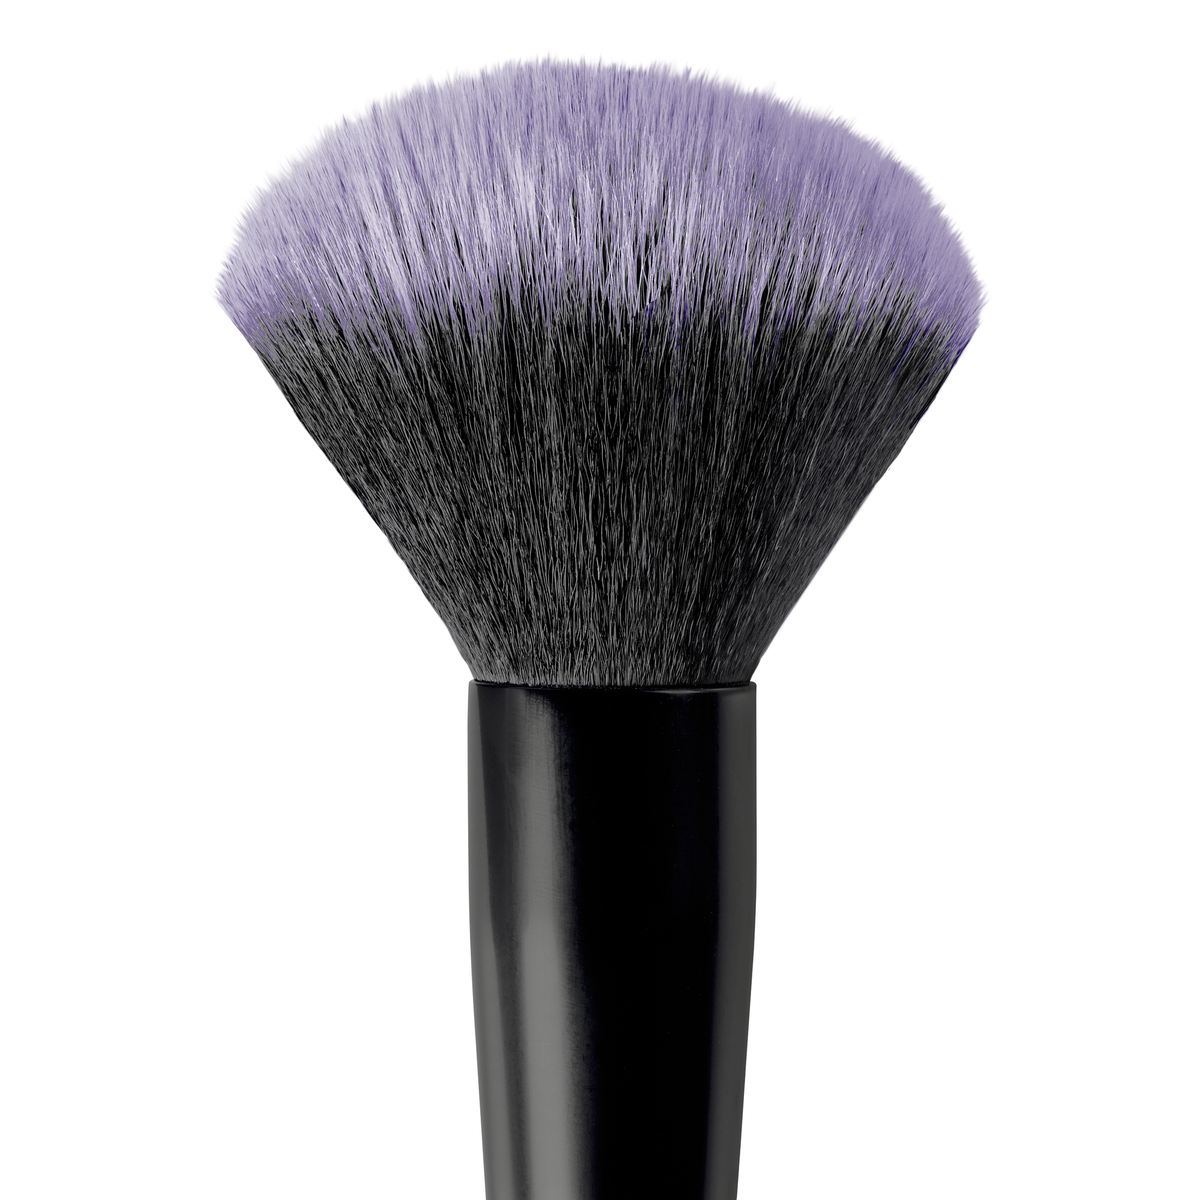 Detail view of powder brush head with wide-splayed bristles.